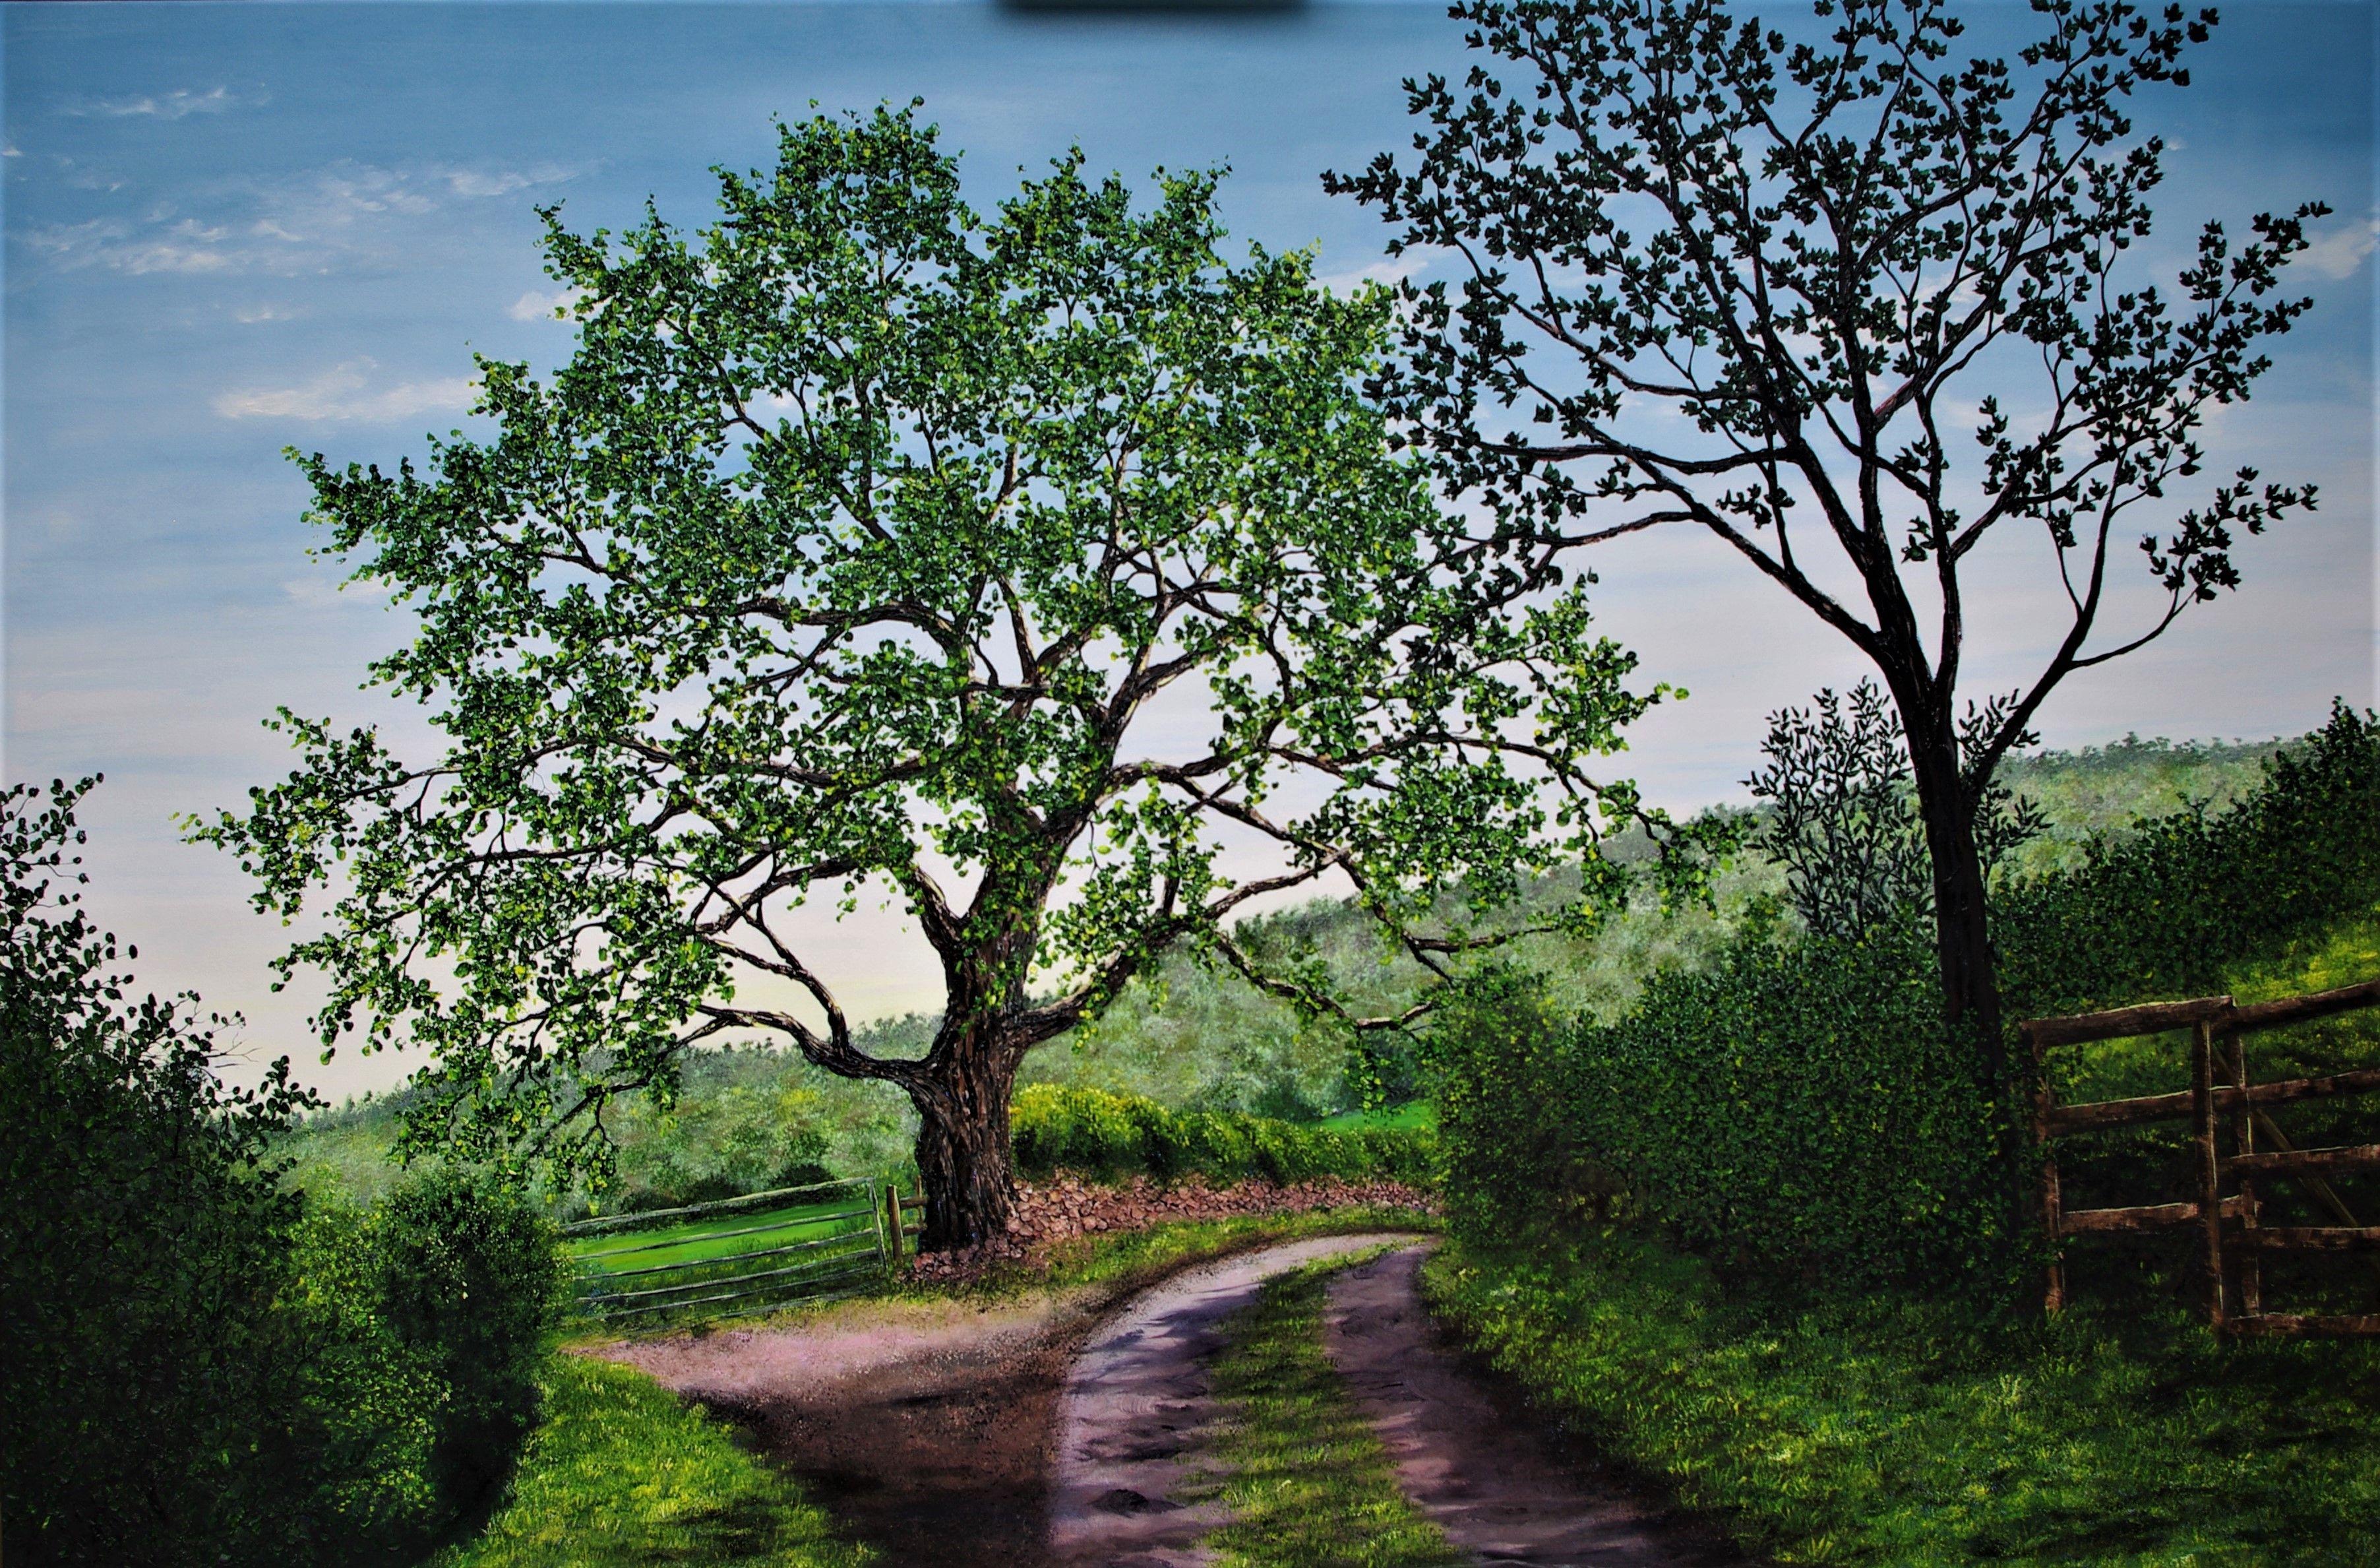 Textured oil painting of a country lane in the heart of cheshire.  Down this lane stands a mighty oak tree in the full bloom of summer, it has stood there along side the sandstone wall for hundreds of years giving shelter and life to all sorts of